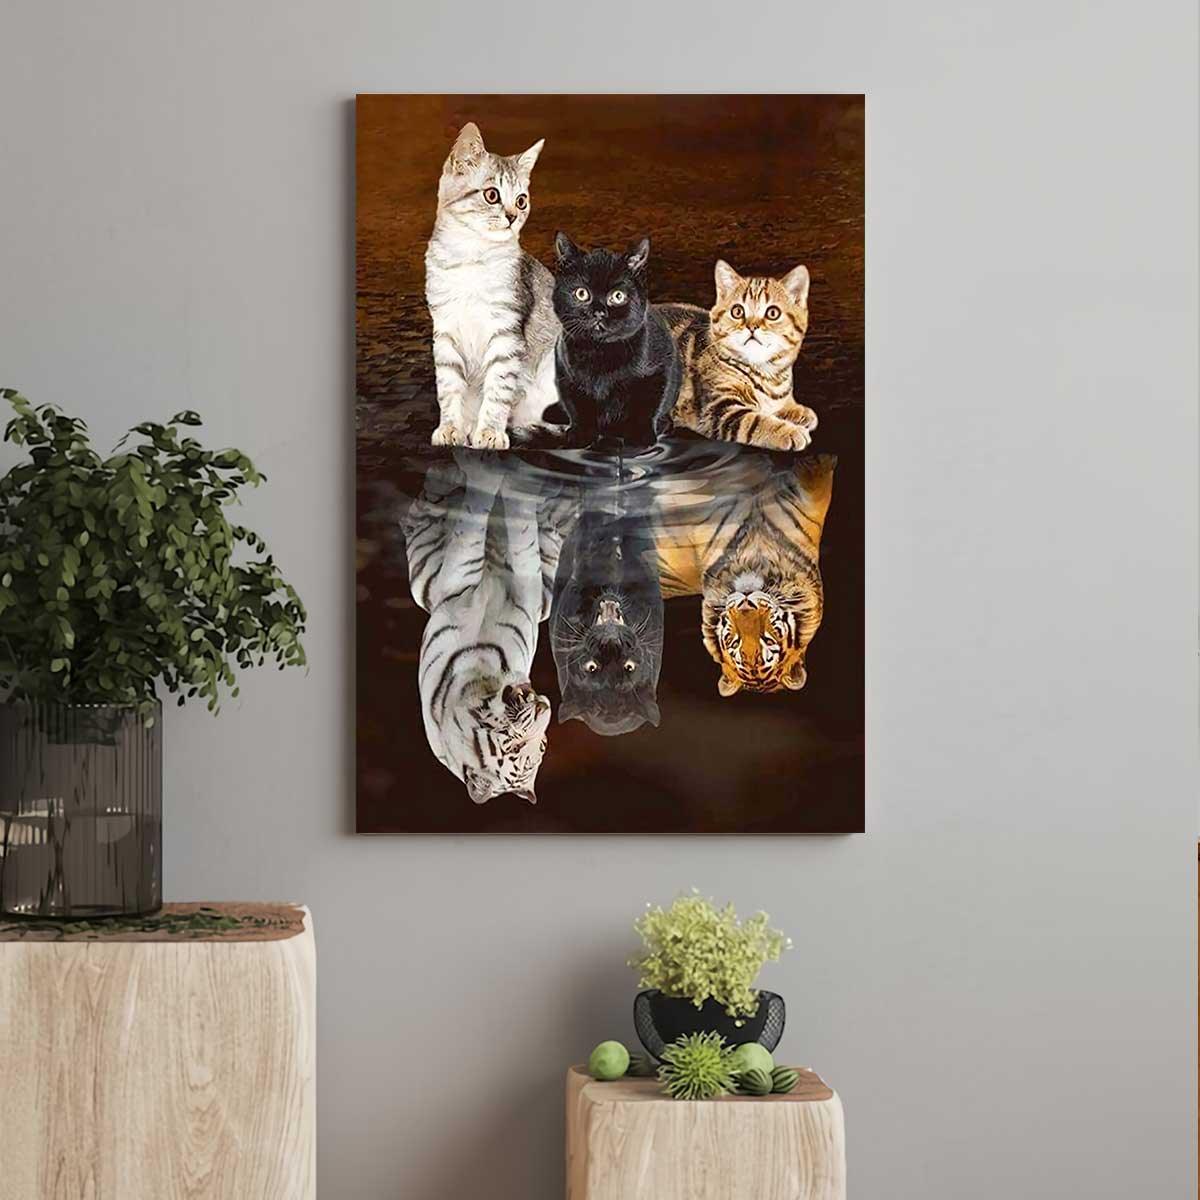 Cat Portrait Canvas - Baby Cats Or Mighty Tigers Premium Wrapped Canvas - Pet Gift For Cat Lover, Friends, Family - Amzanimalsgift